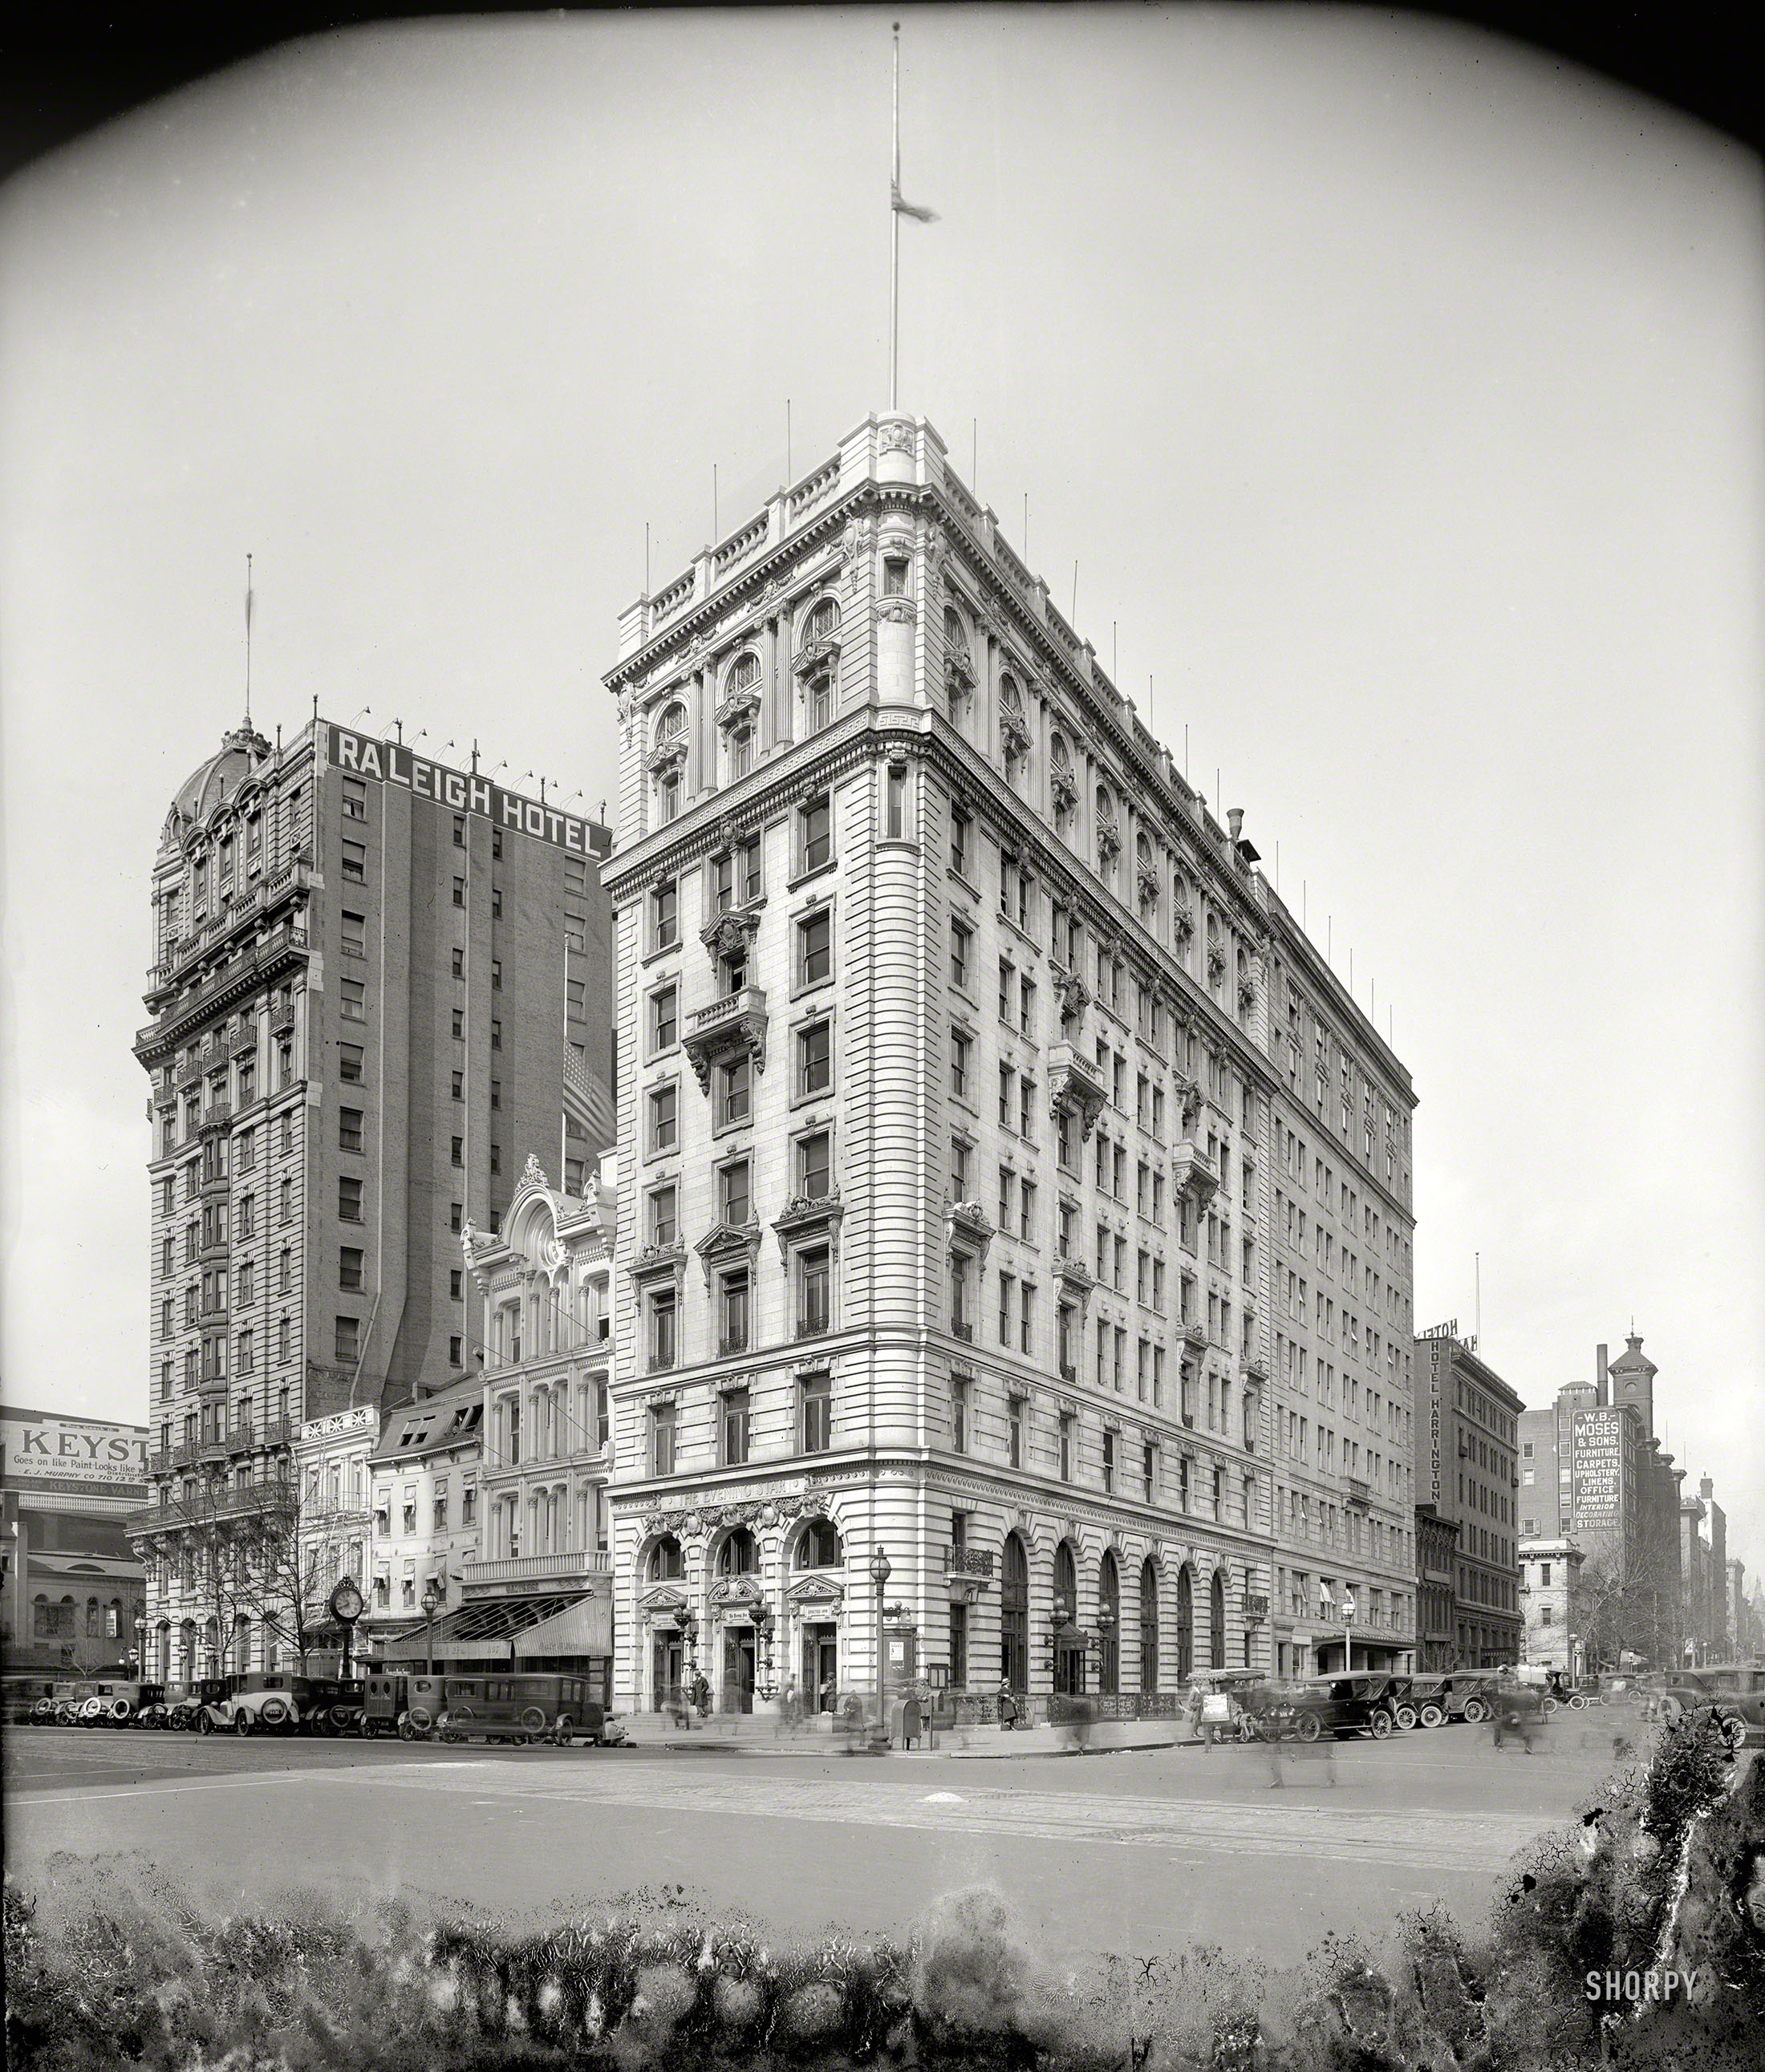 Washington, D.C., 1924. "Evening Star building." Offices of the Washington Evening Star newspaper next to the Raleigh Hotel on Pennsylvania Avenue between 11th (on the right) and 12th streets. Where there seems to be something of a mold problem. Harris & Ewing Collection glass negative. View full size.